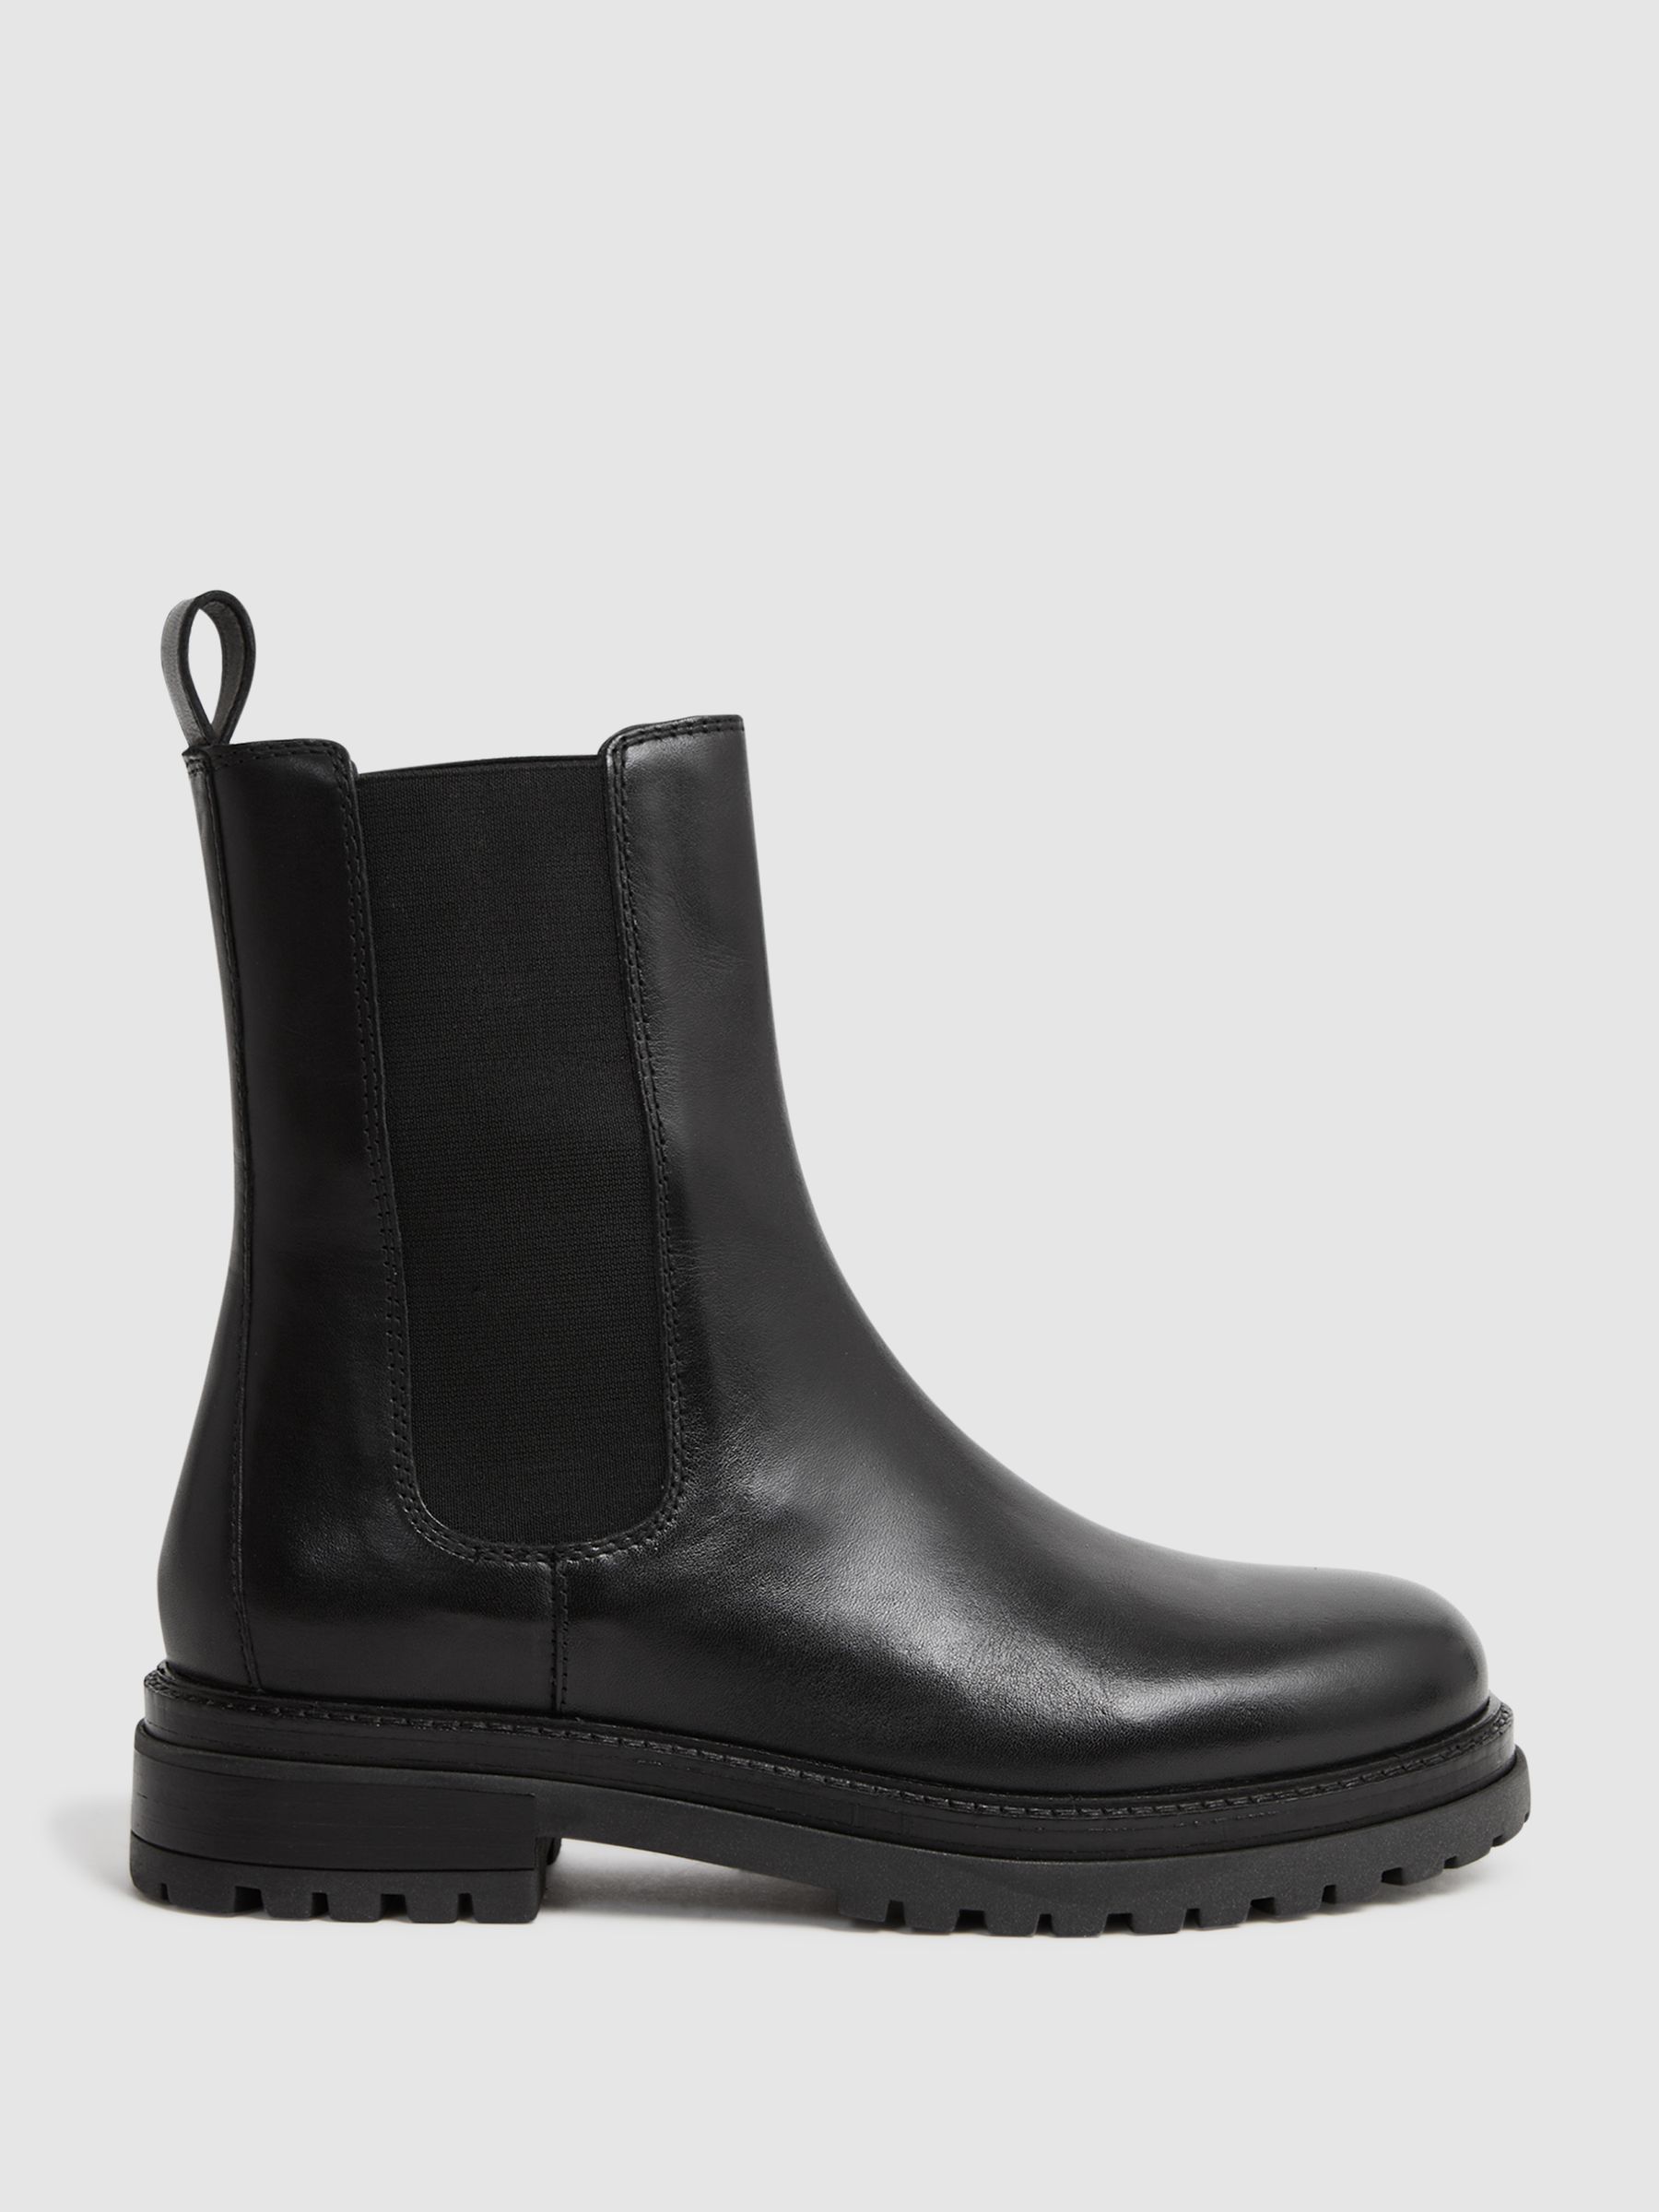 Reiss Thea Leather Chelsea Boots - REISS